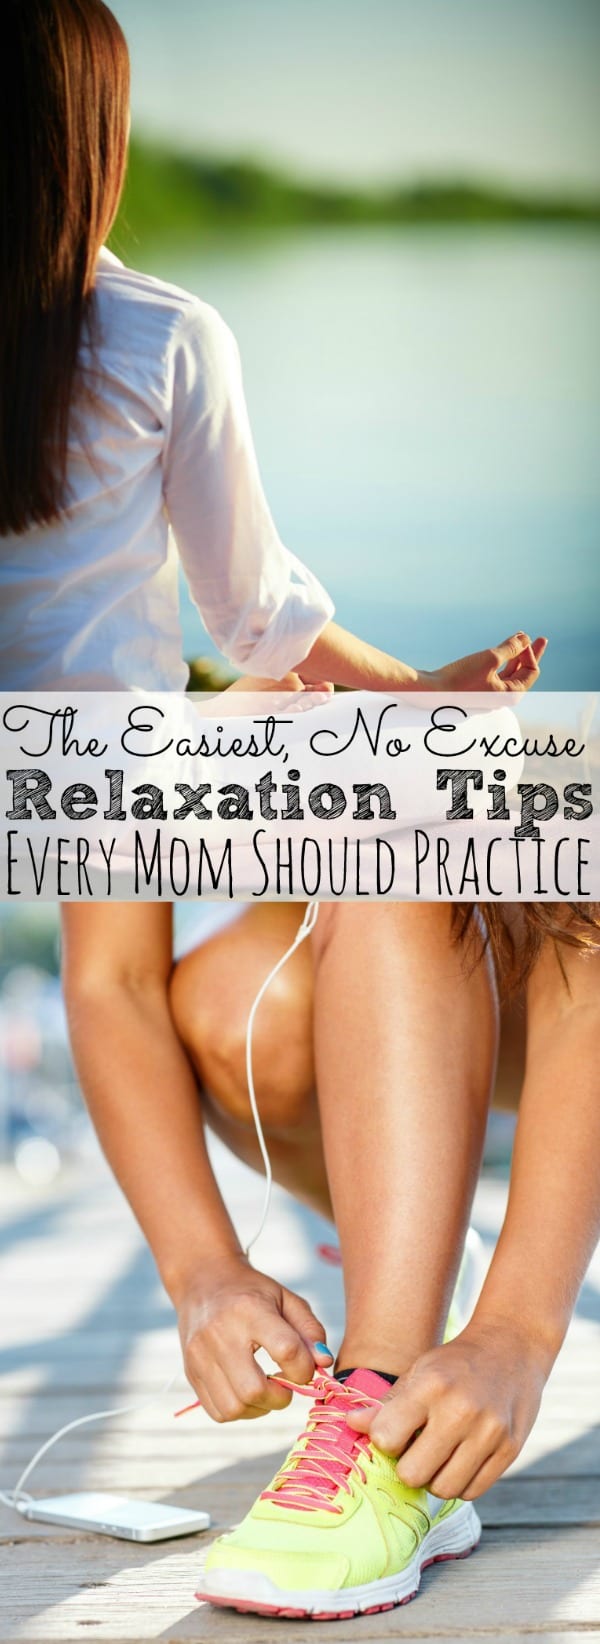 The Easiest, No Excuse Relaxation Tips For Moms